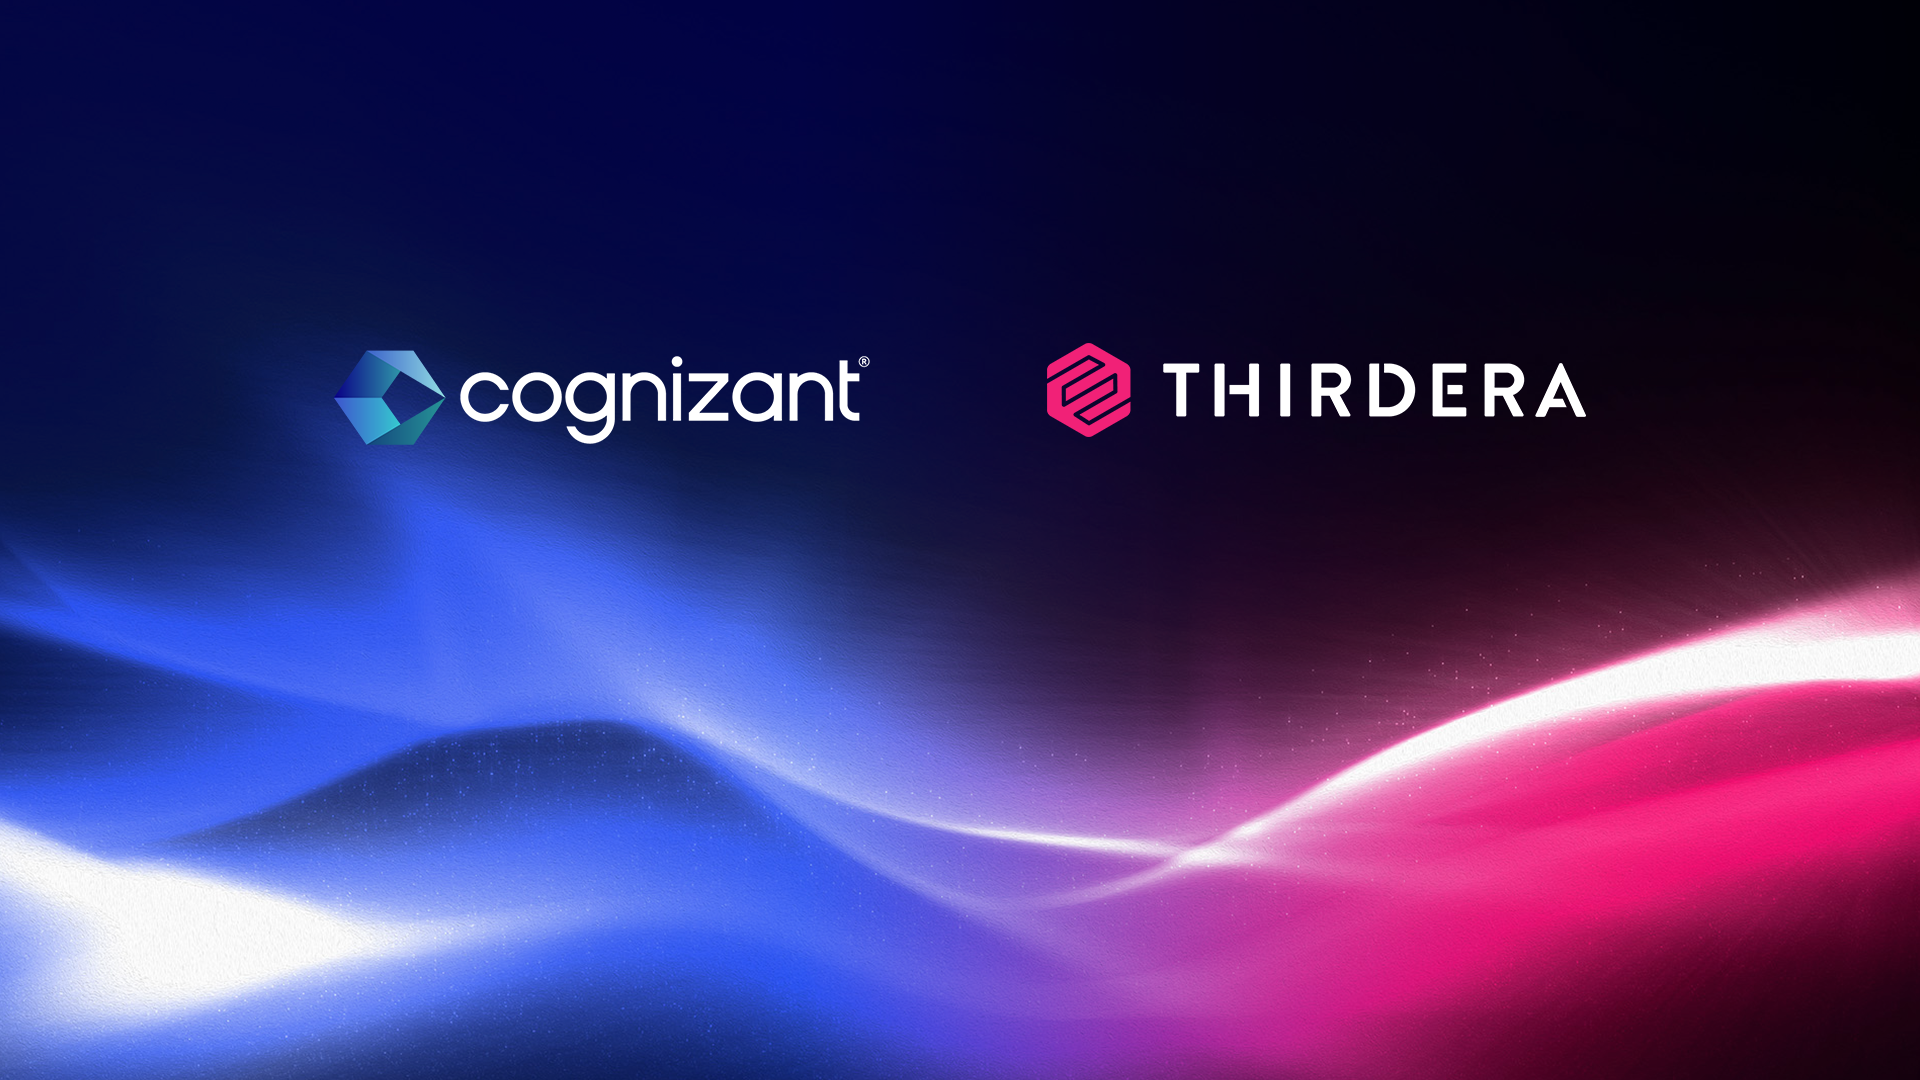 Cognizant to acquire Thirdera to enhance cross-industry digital transformation with ServiceNow